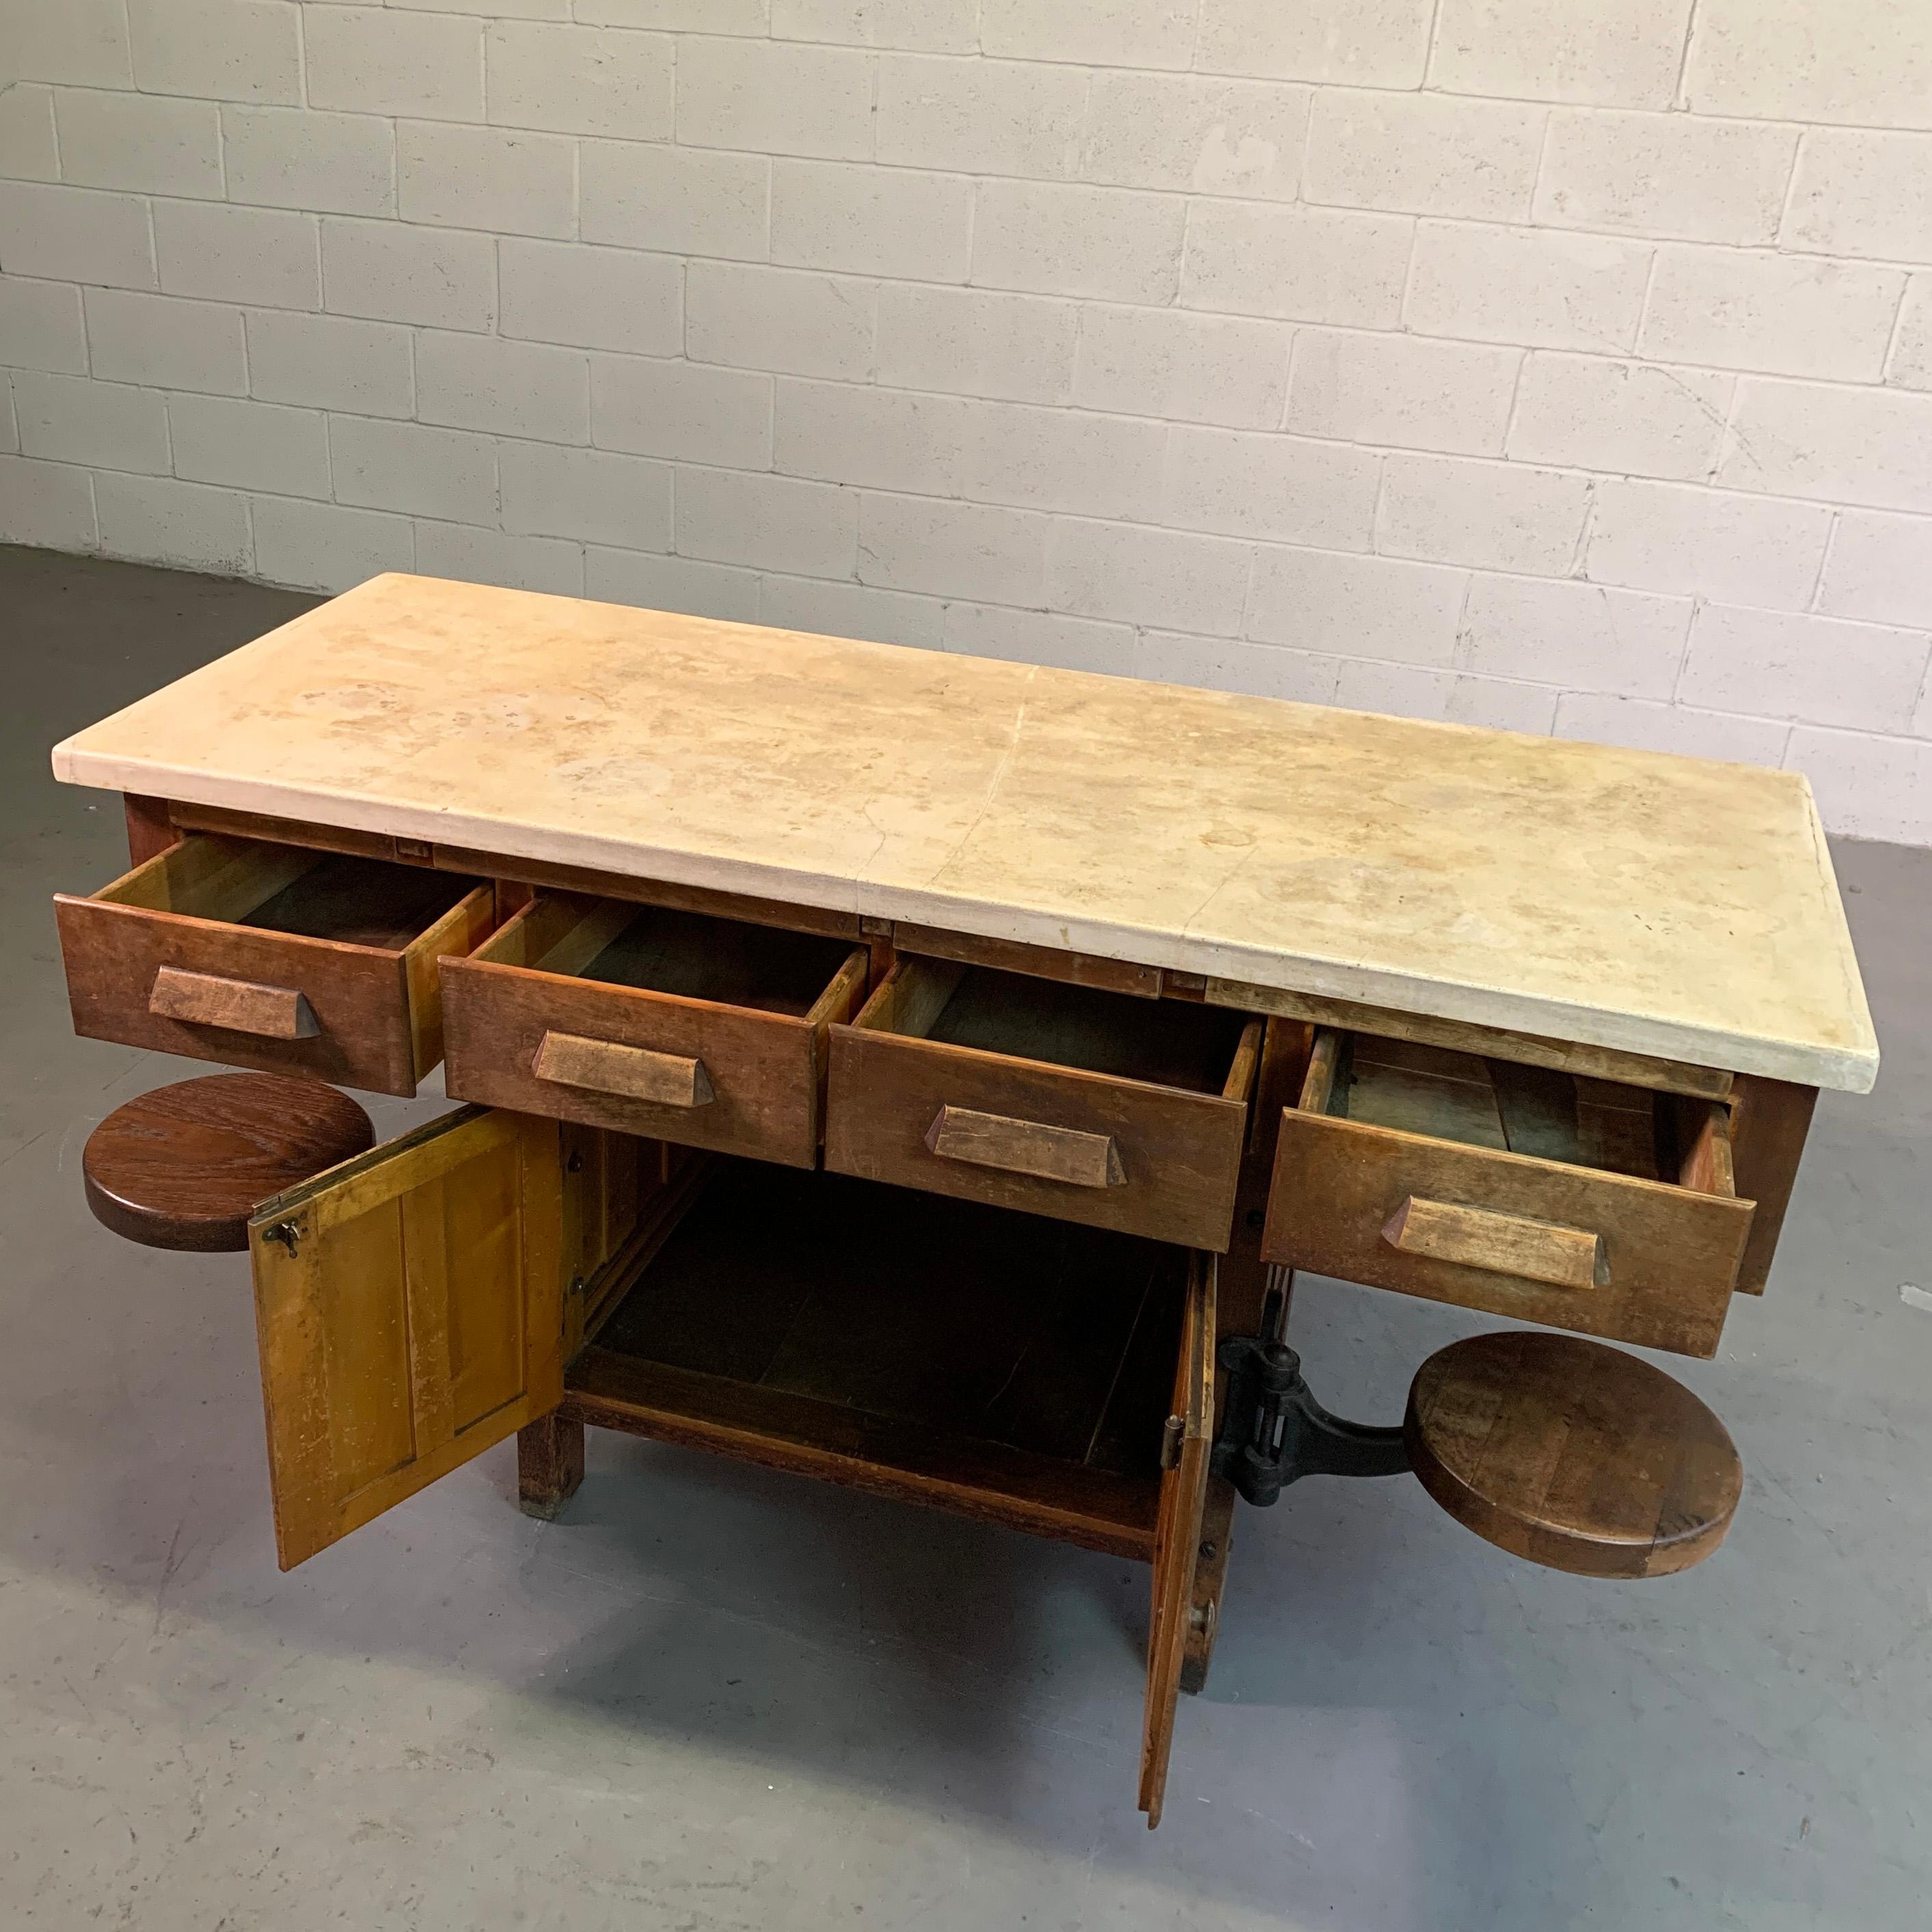 Concrete Early 20th Century Industrial Laboratory Workbench